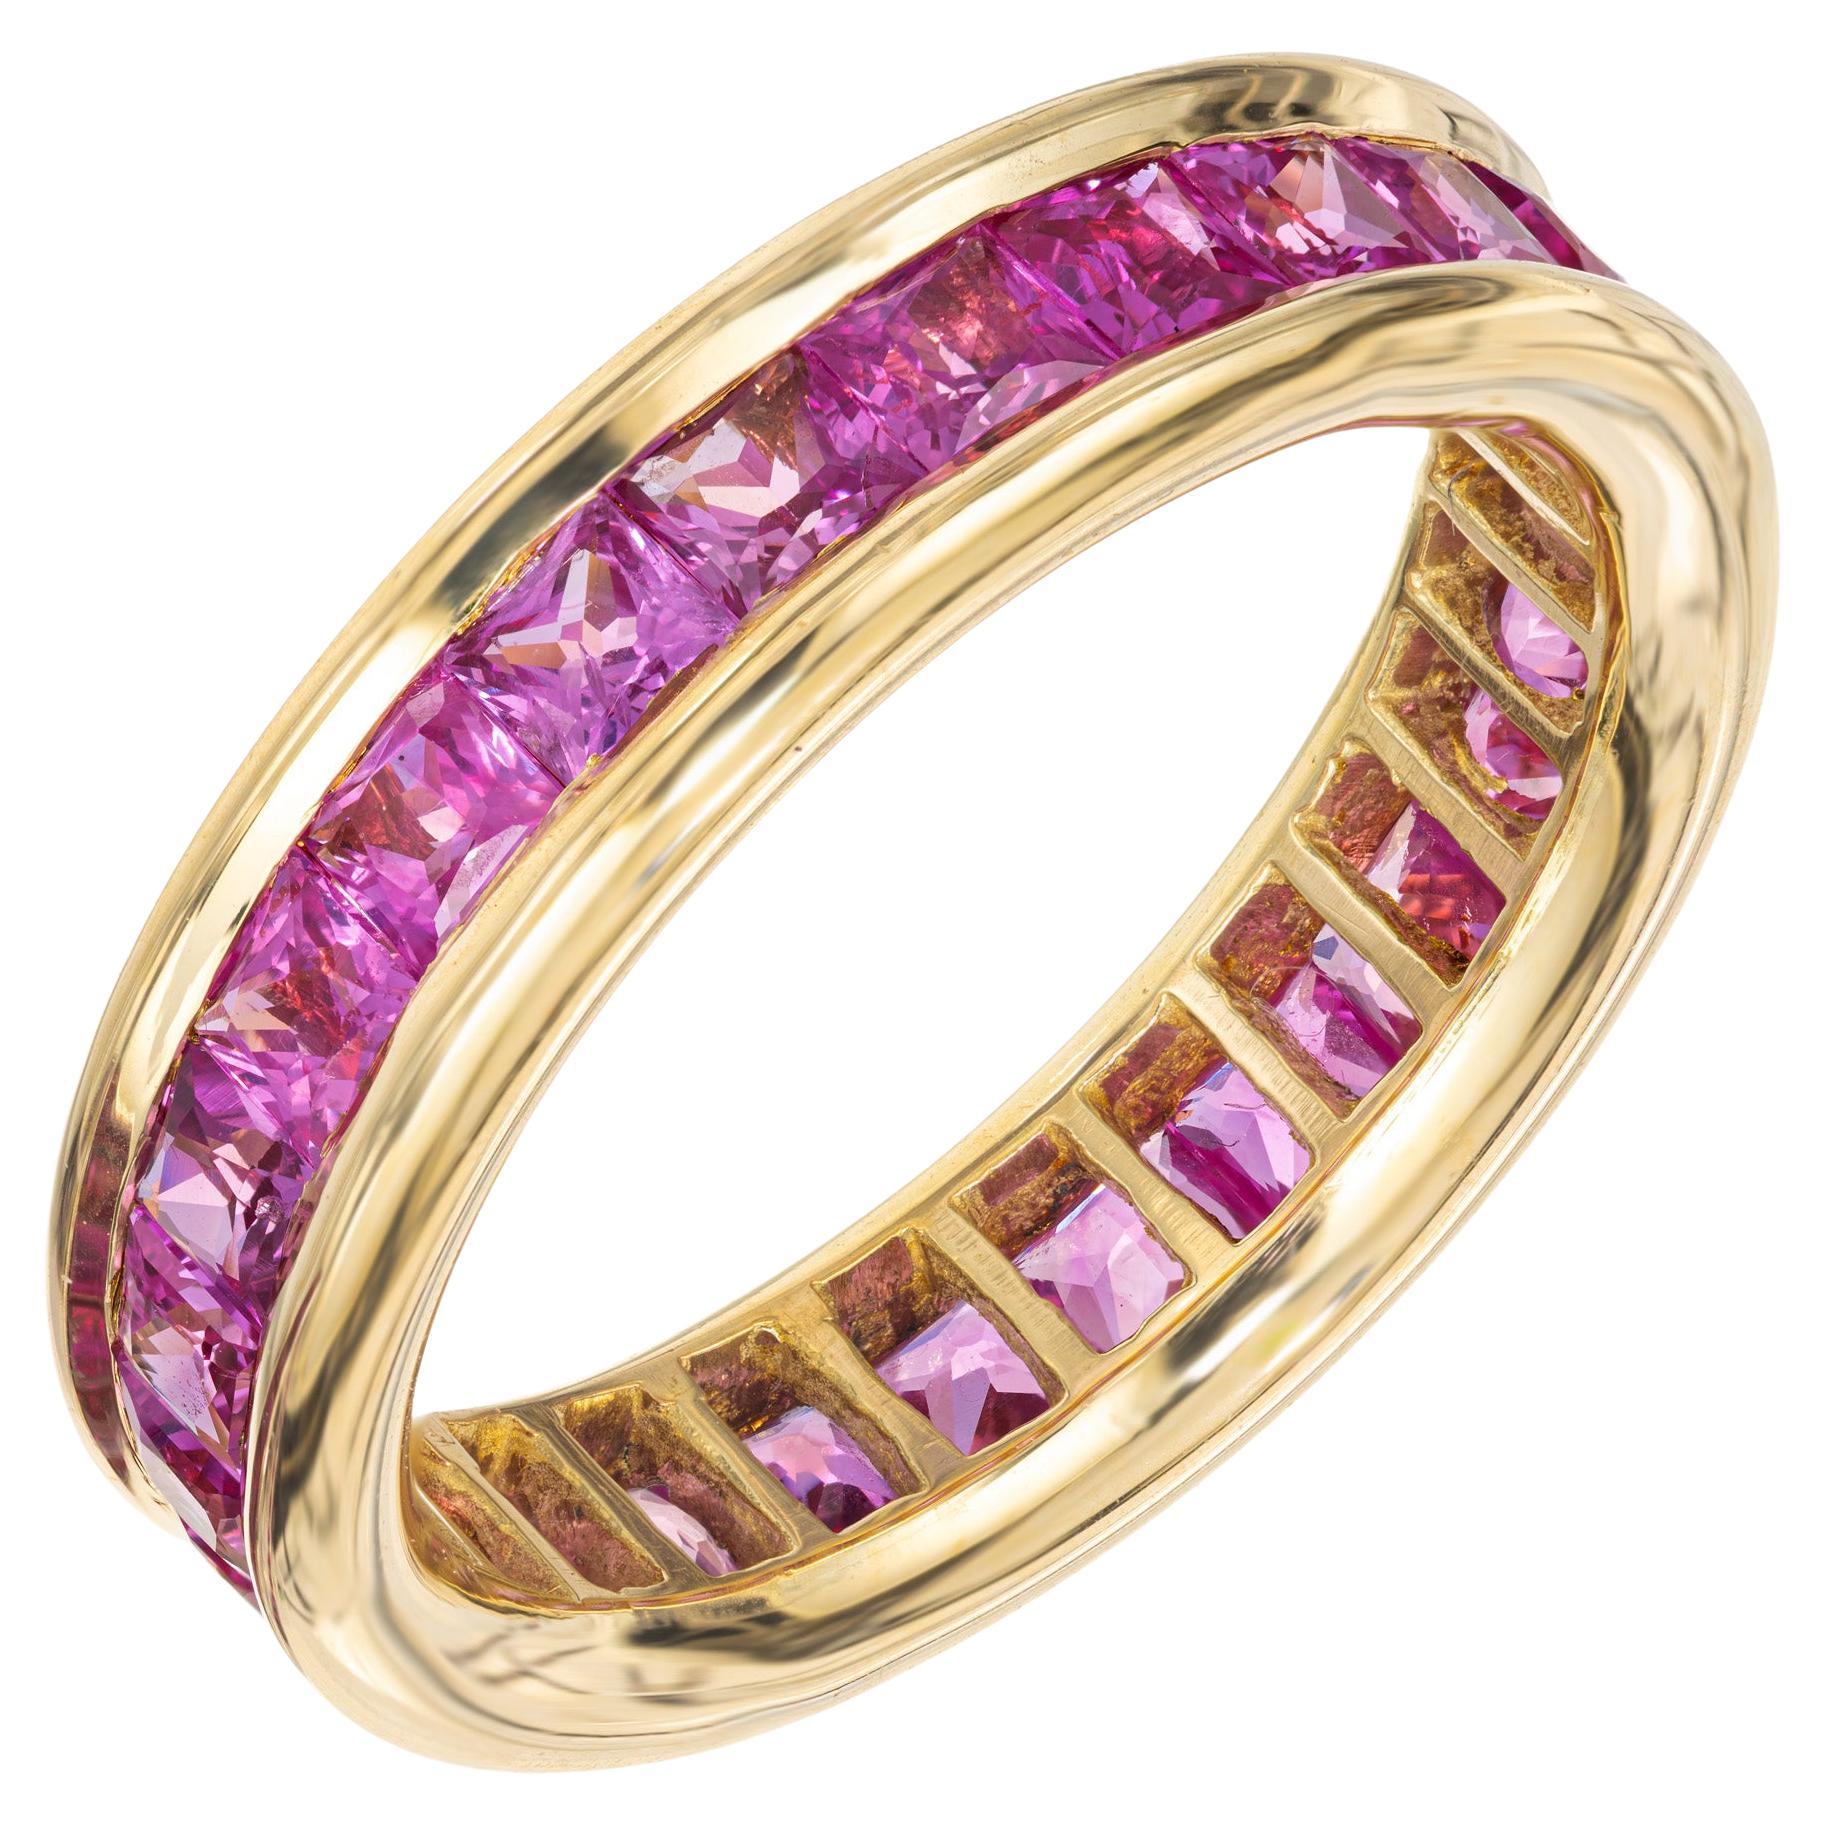 3.75 Carat Princess Cut Pink Sapphire Gold Eternity Wedding Band Ring For Sale